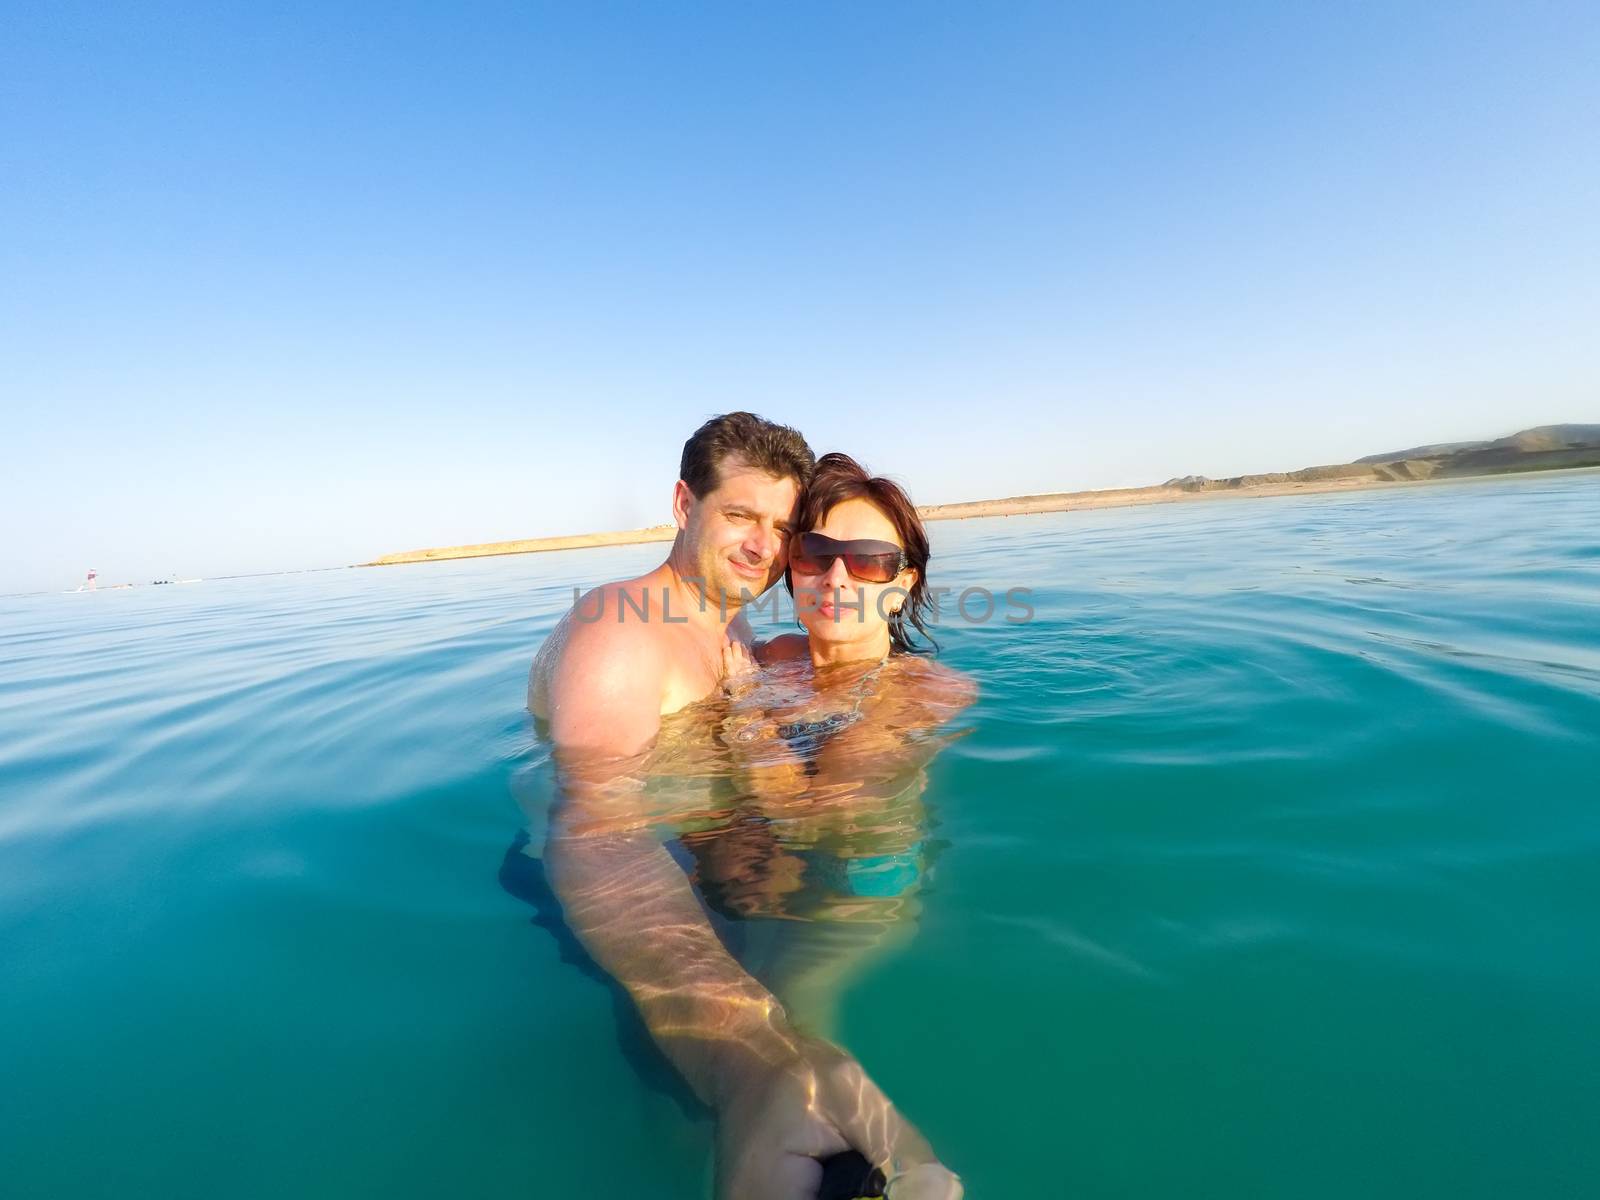 Couple having fun in the water summertime holidays by artush